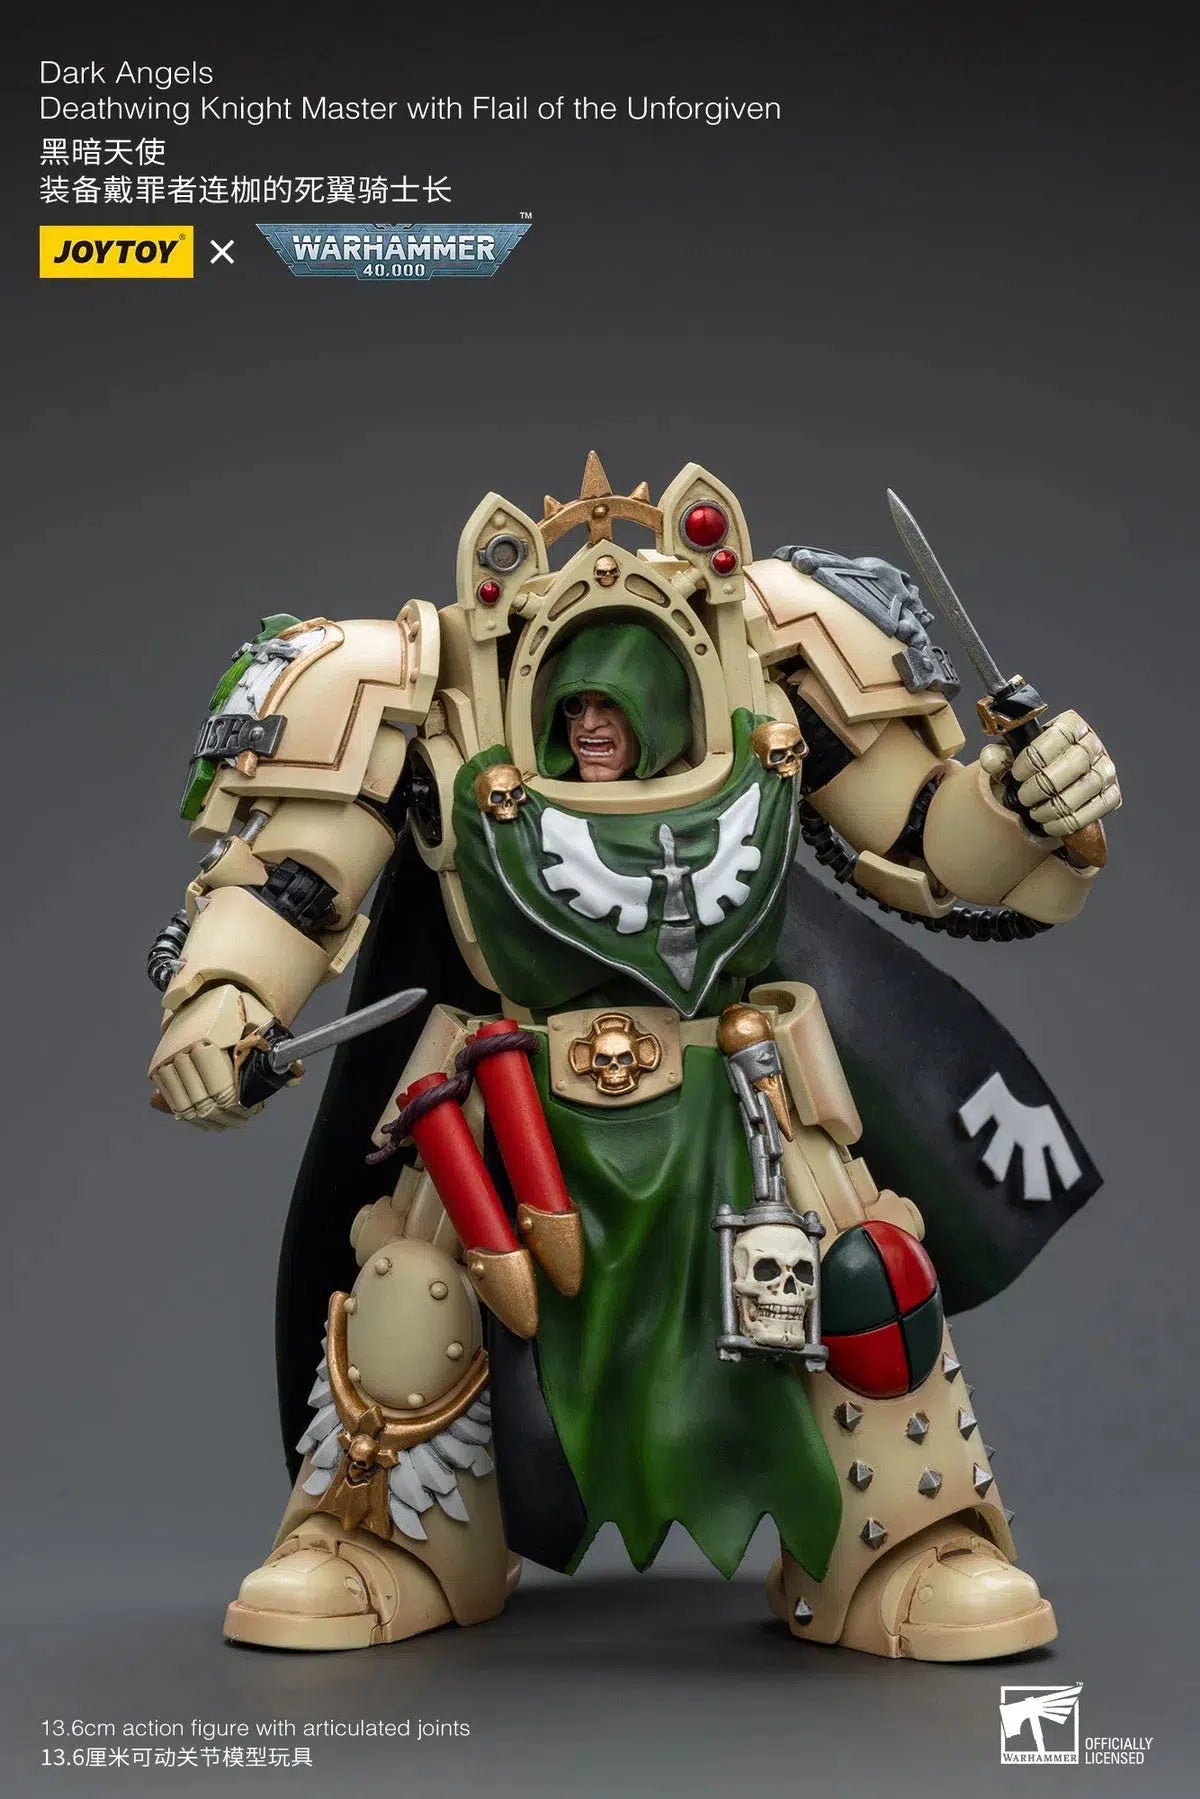 Warhammer 40K: Dark Angels: Deathwing Knight Master with Flail of the Unforgiven: Joy Toy: Joy Toy